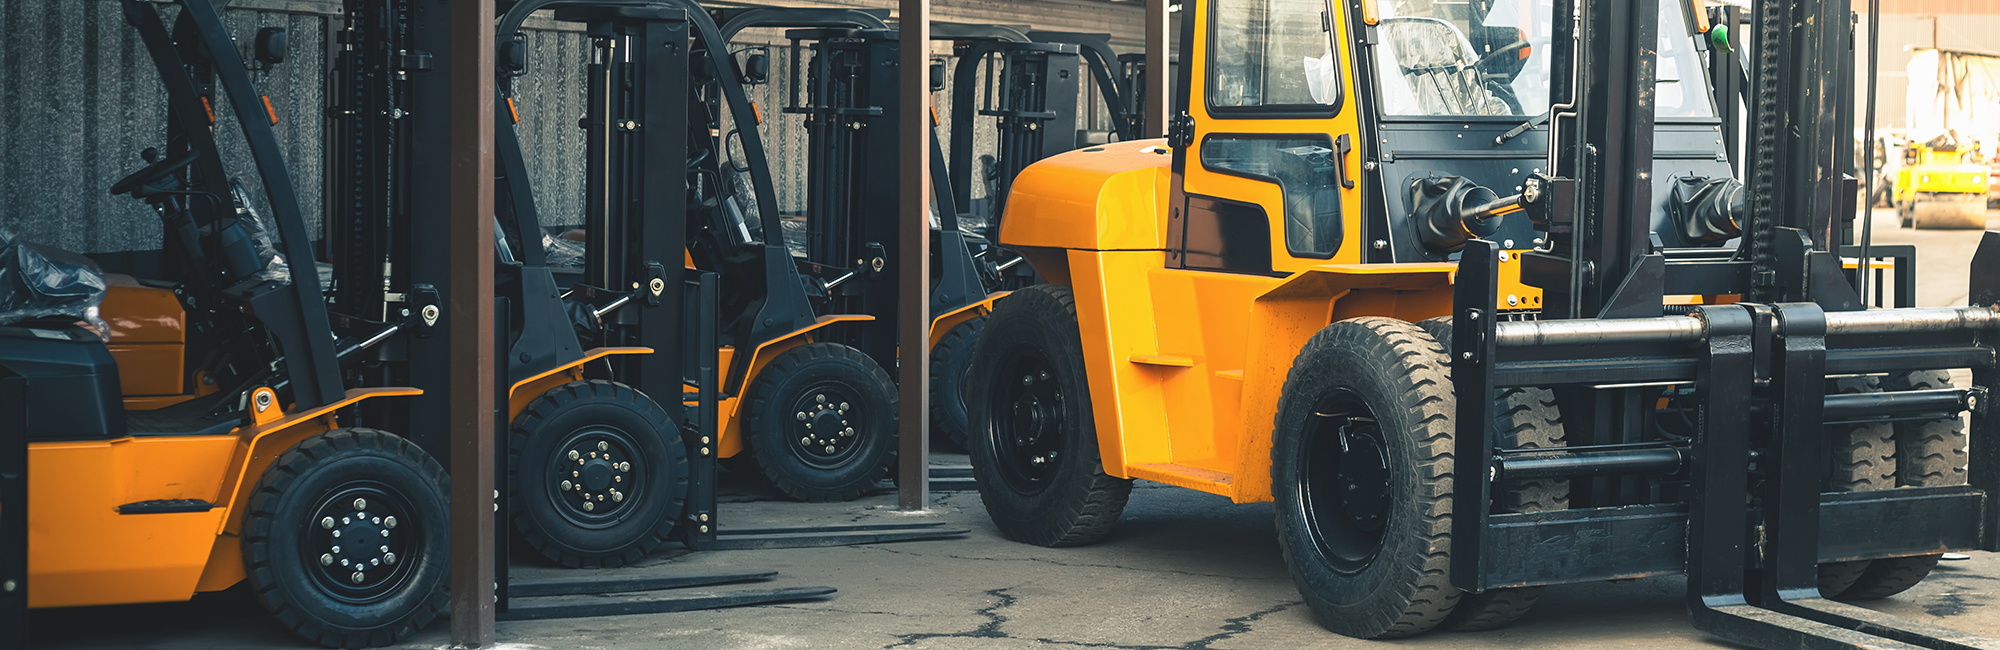 Yellow forklift trucks lined up in a yard with heavy handler in front